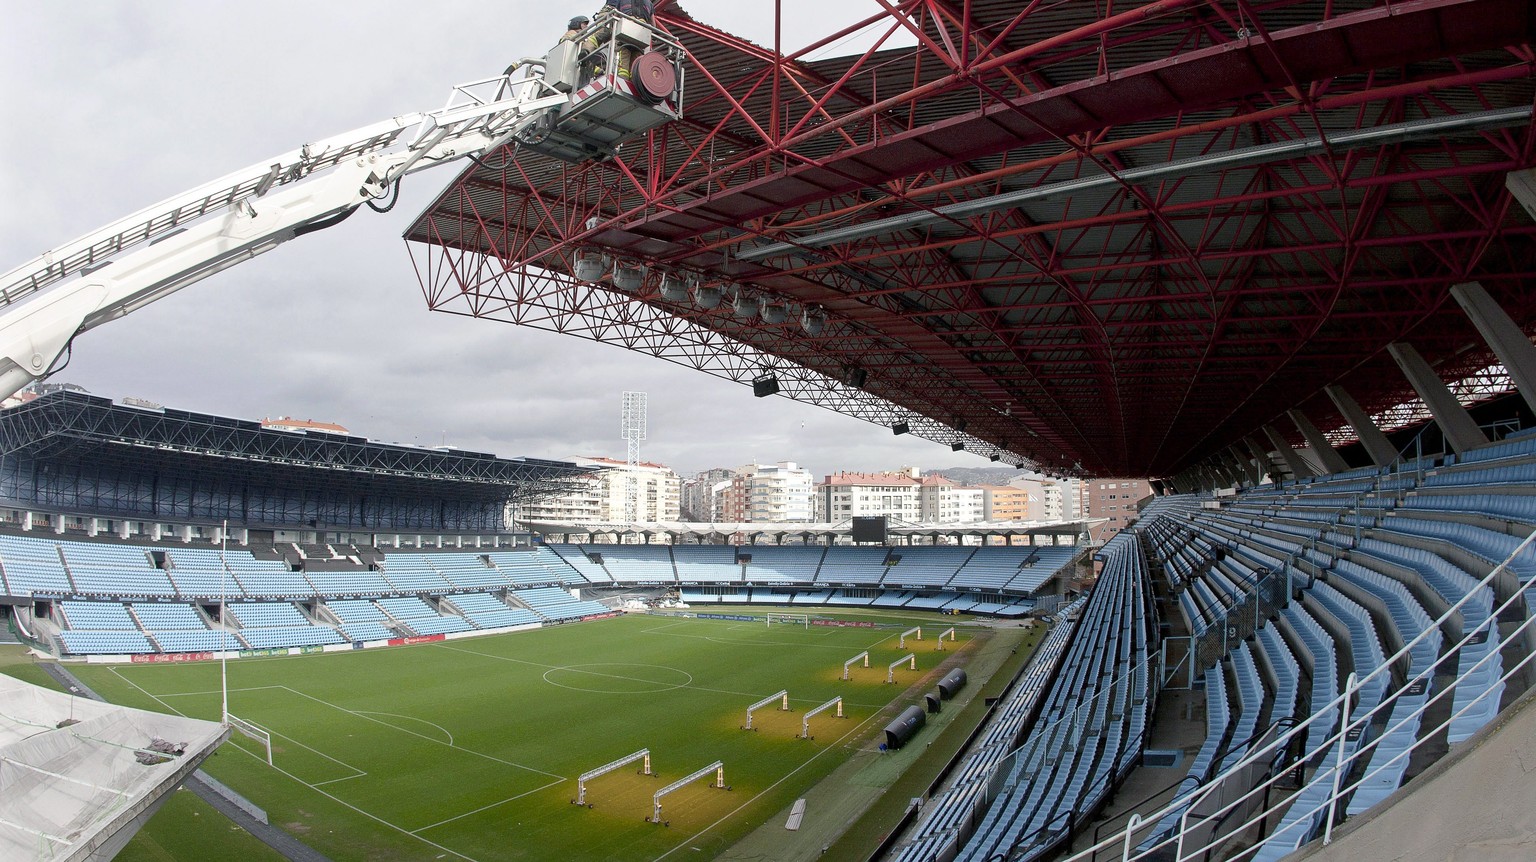 epa05775080 Firefighters work on the damaged roof of the Balaidos stadium in Vigo, northwestern Spain, 06 February 2017, after the Spanish Primera Division soccer match between Celta Vigo and Real Mad ...